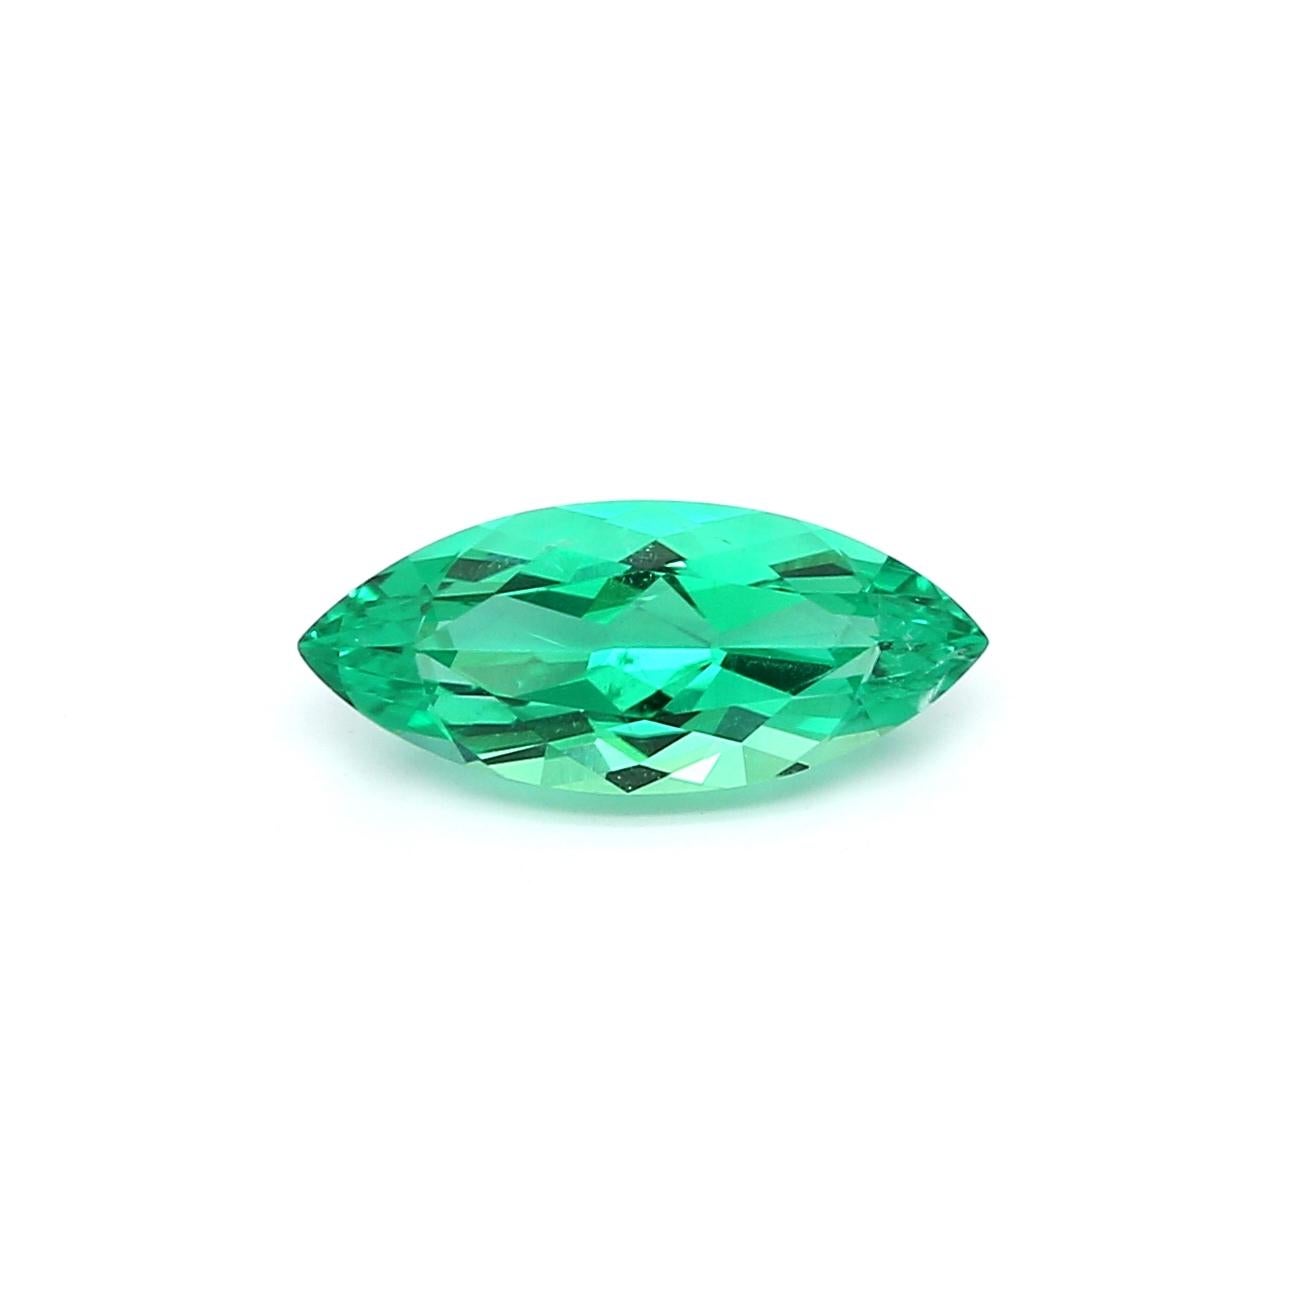 An amazing marquise-shape Russian Emerald which allows jewelers to create a unique piece of wearable art.
This exceptional quality gemstone would make a custom-made jewelry design. Perfect for Ring or Pendant.

Shape - Marquise
Weight -